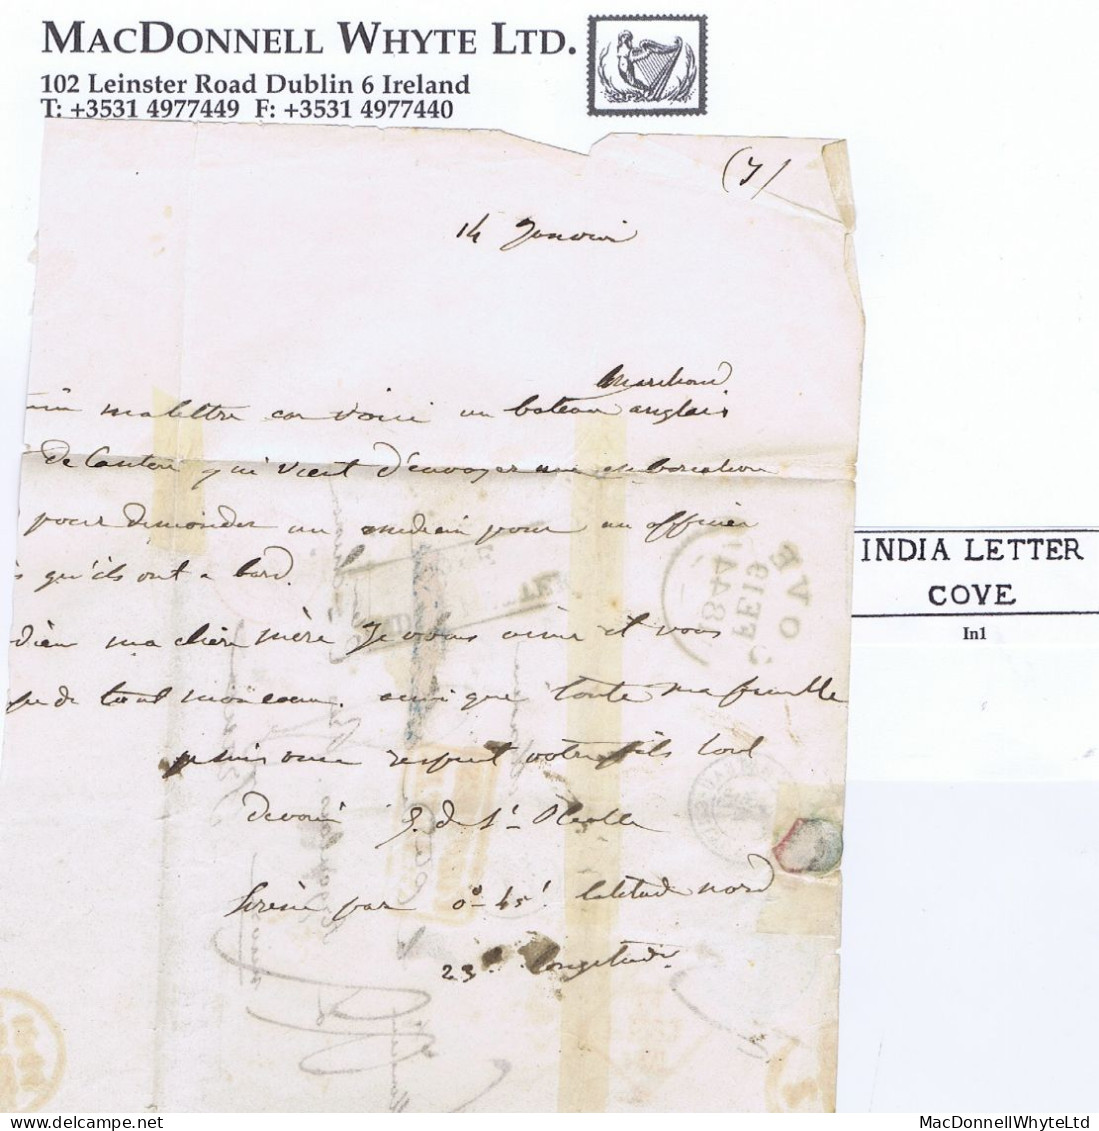 Ireland Maritime Cork 1844 Cover To France With Boxed INDIA LETTER/COVE And COVE FE 19 1844 Cds - Prefilatelia